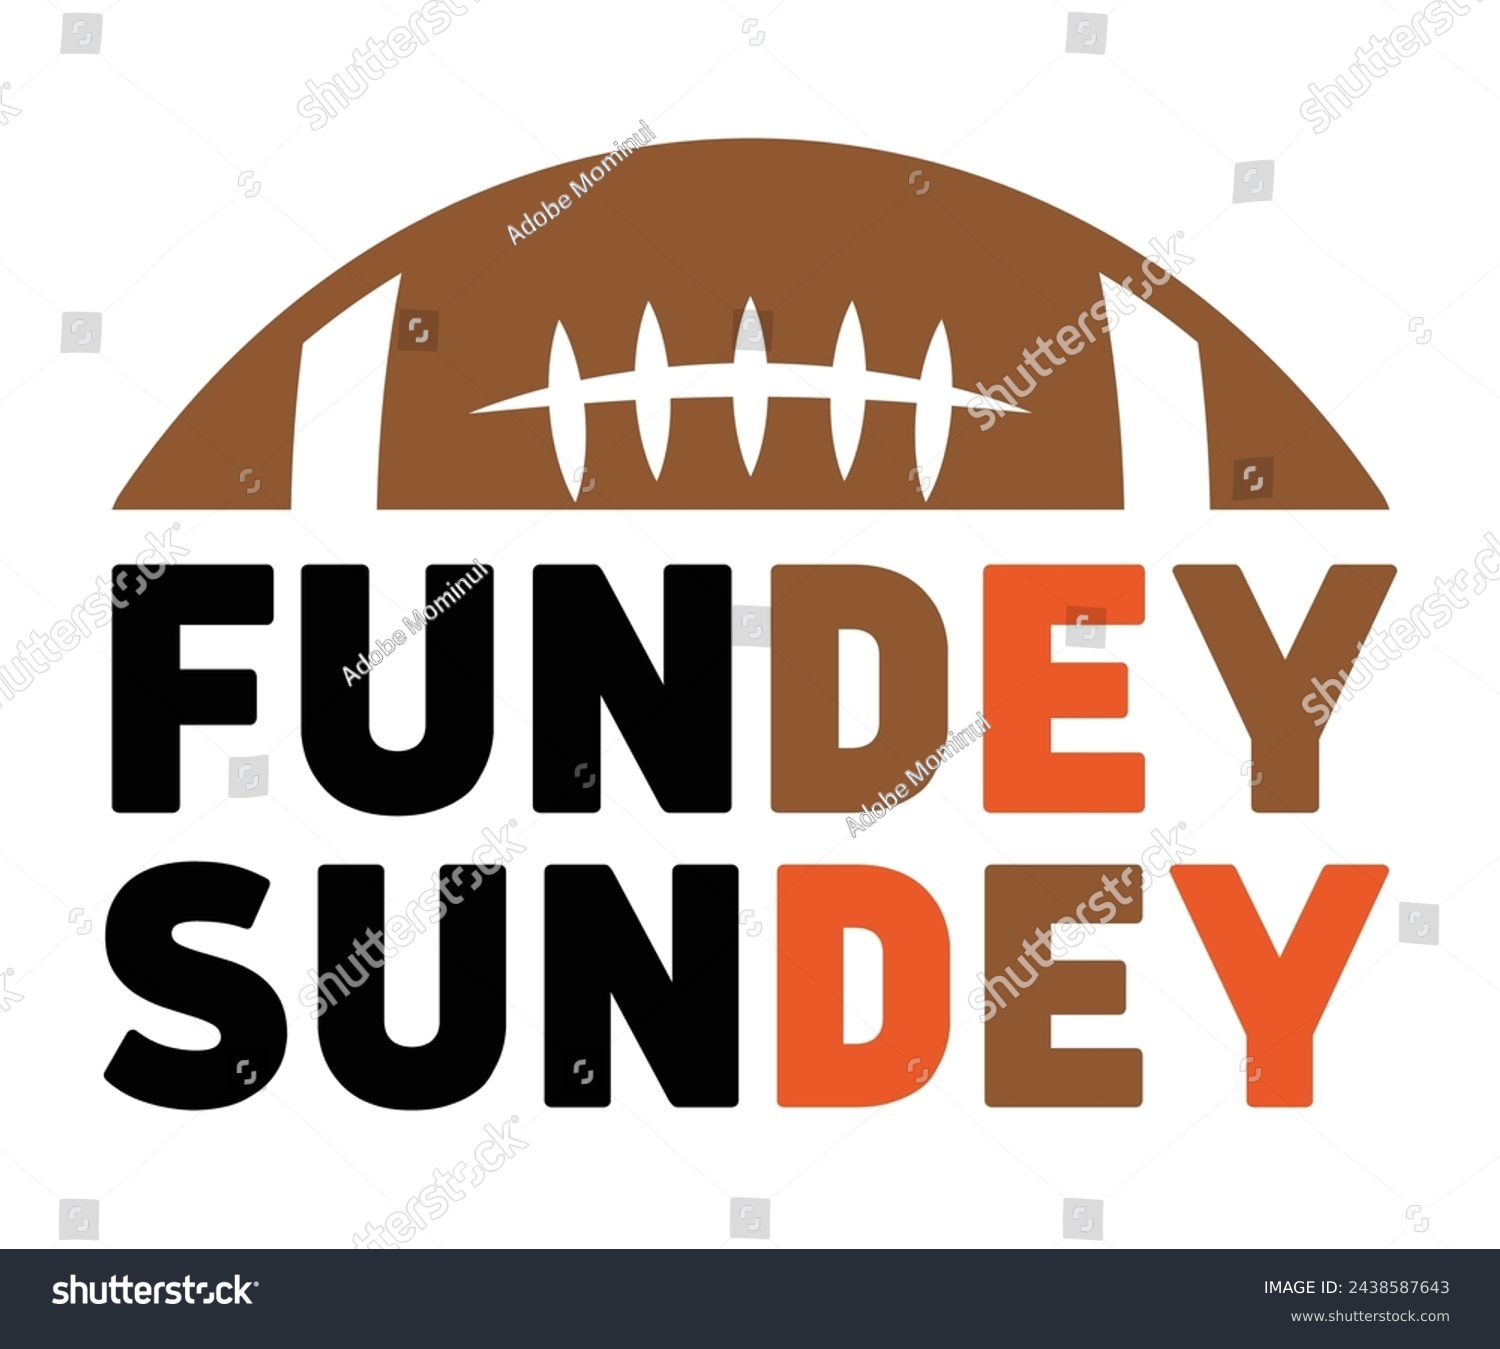 SVG of Fundey Sundey Retro Svg,Football Svg,Football Player Svg,Game Day Shirt,Football Quotes Svg,American Football Svg,Soccer Svg,Cut File,Commercial use svg